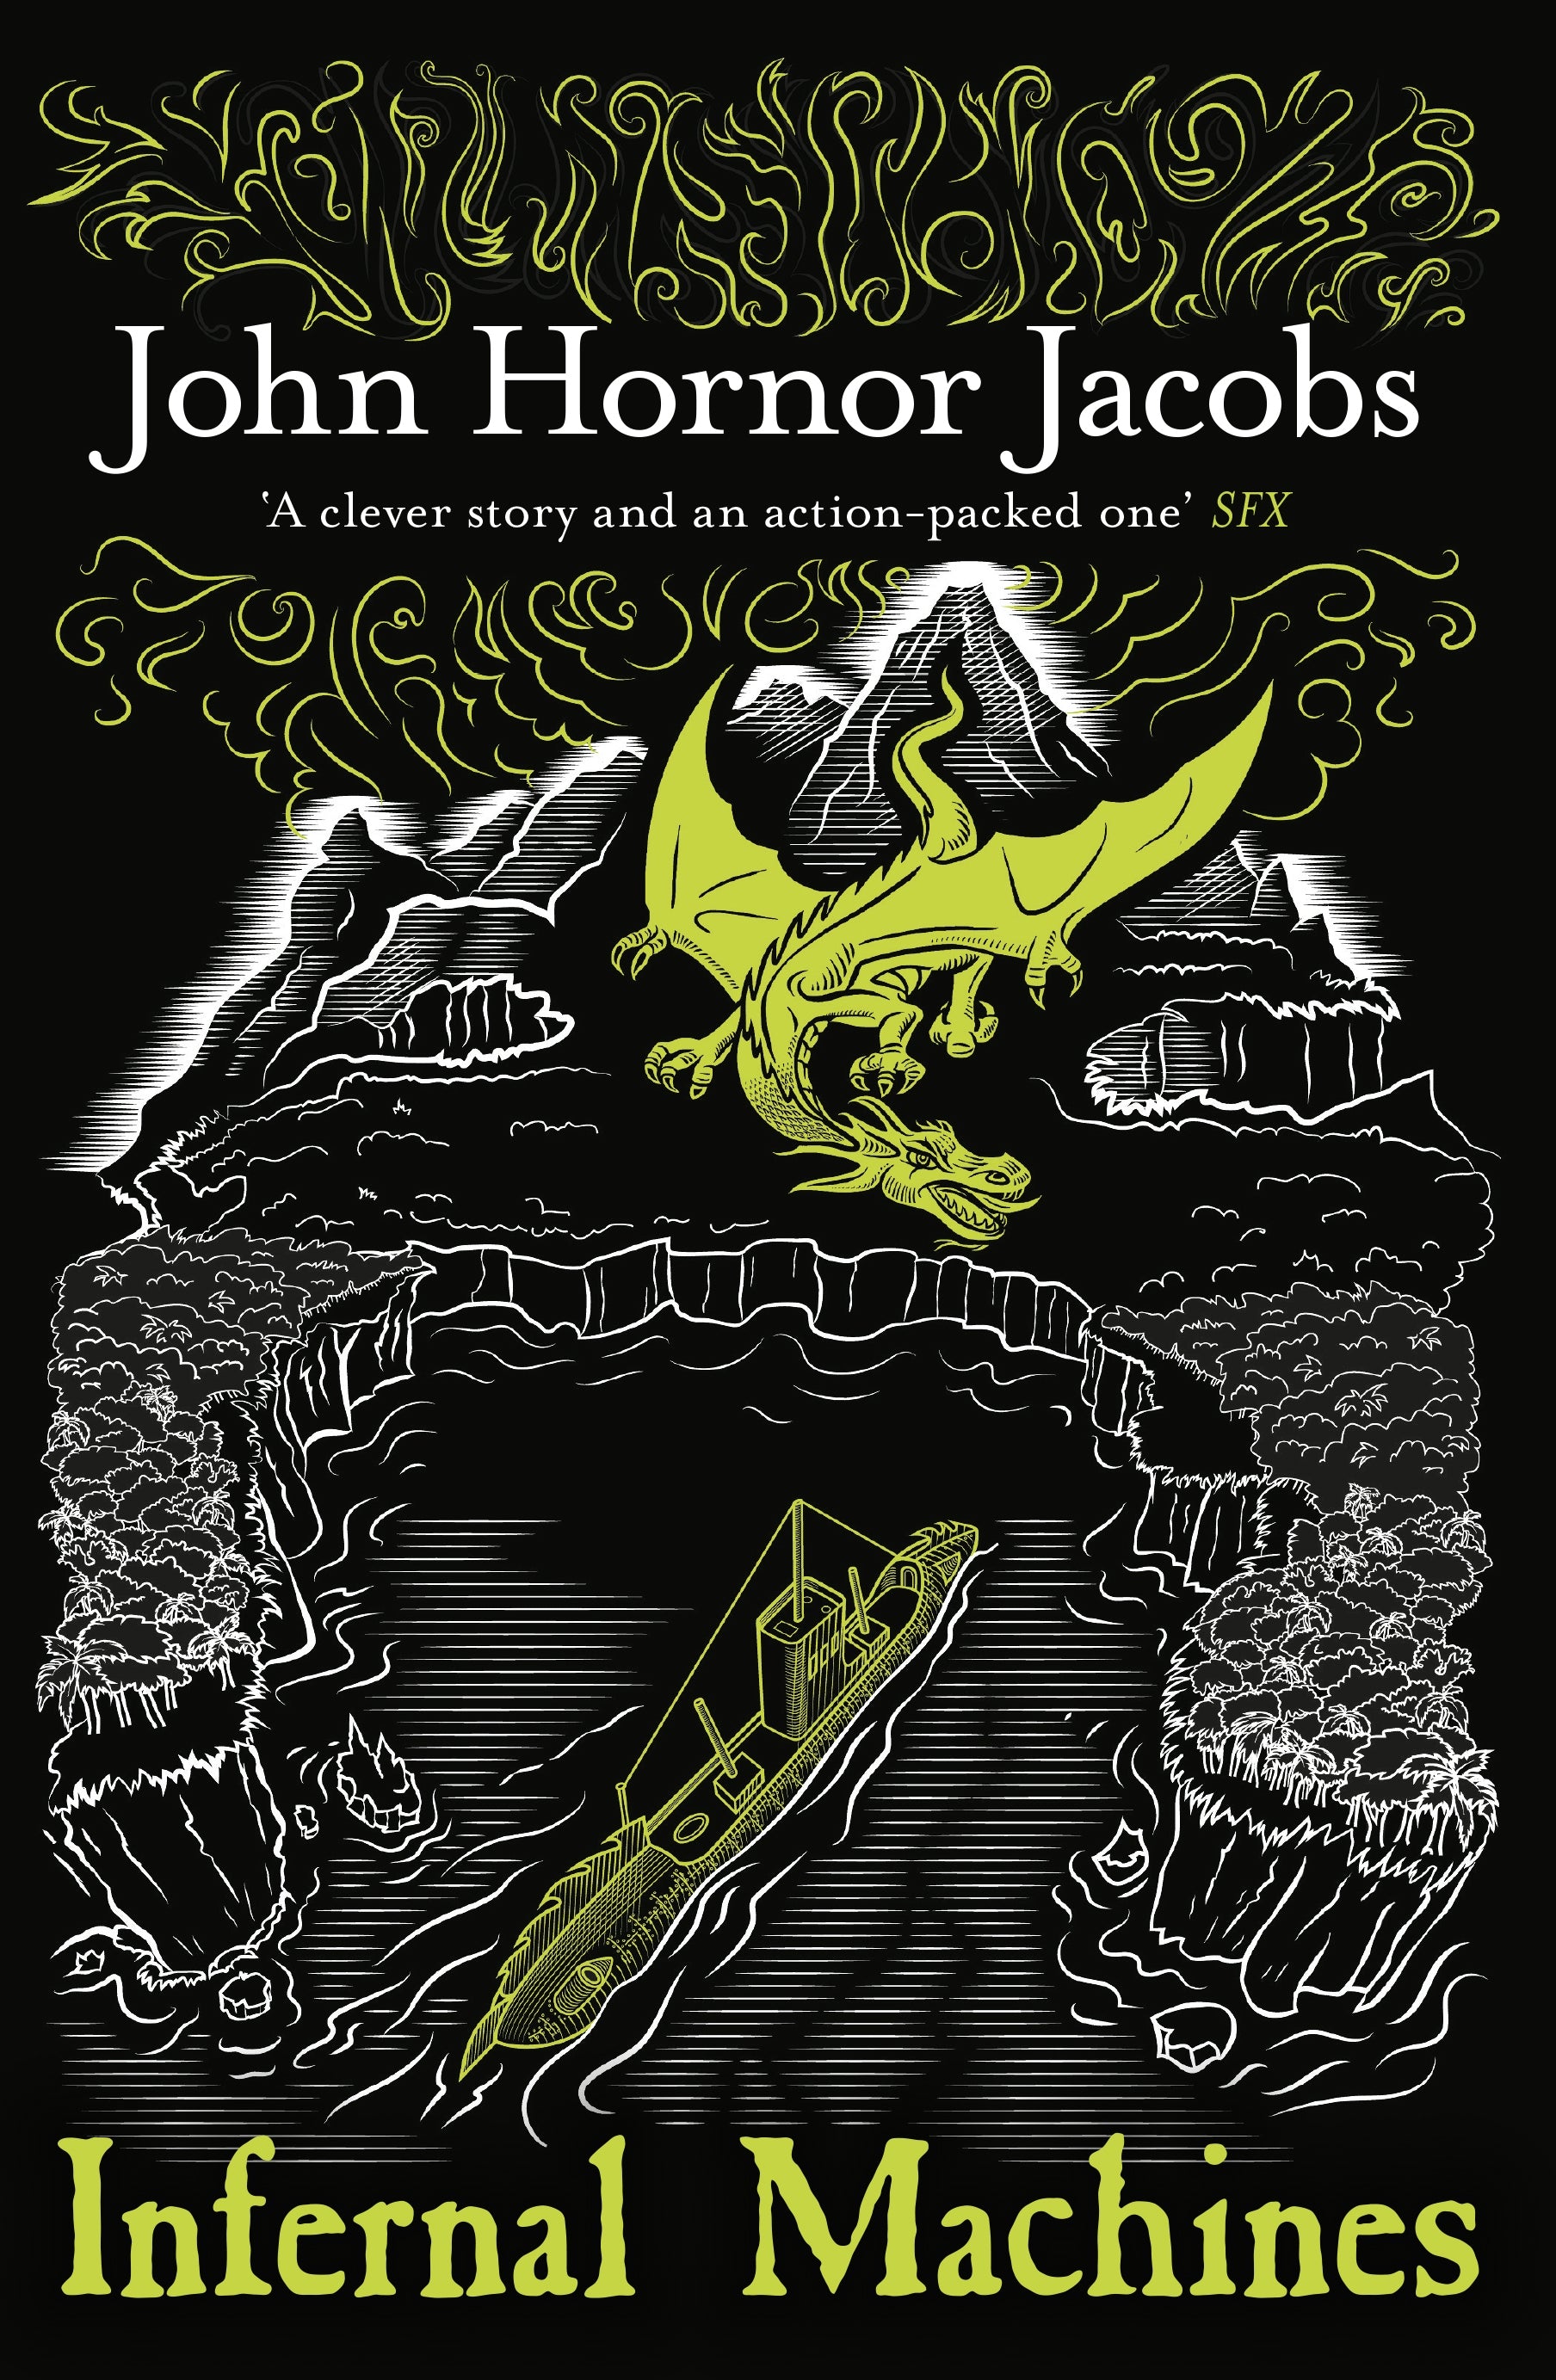 Infernal Machines by John Hornor Jacobs